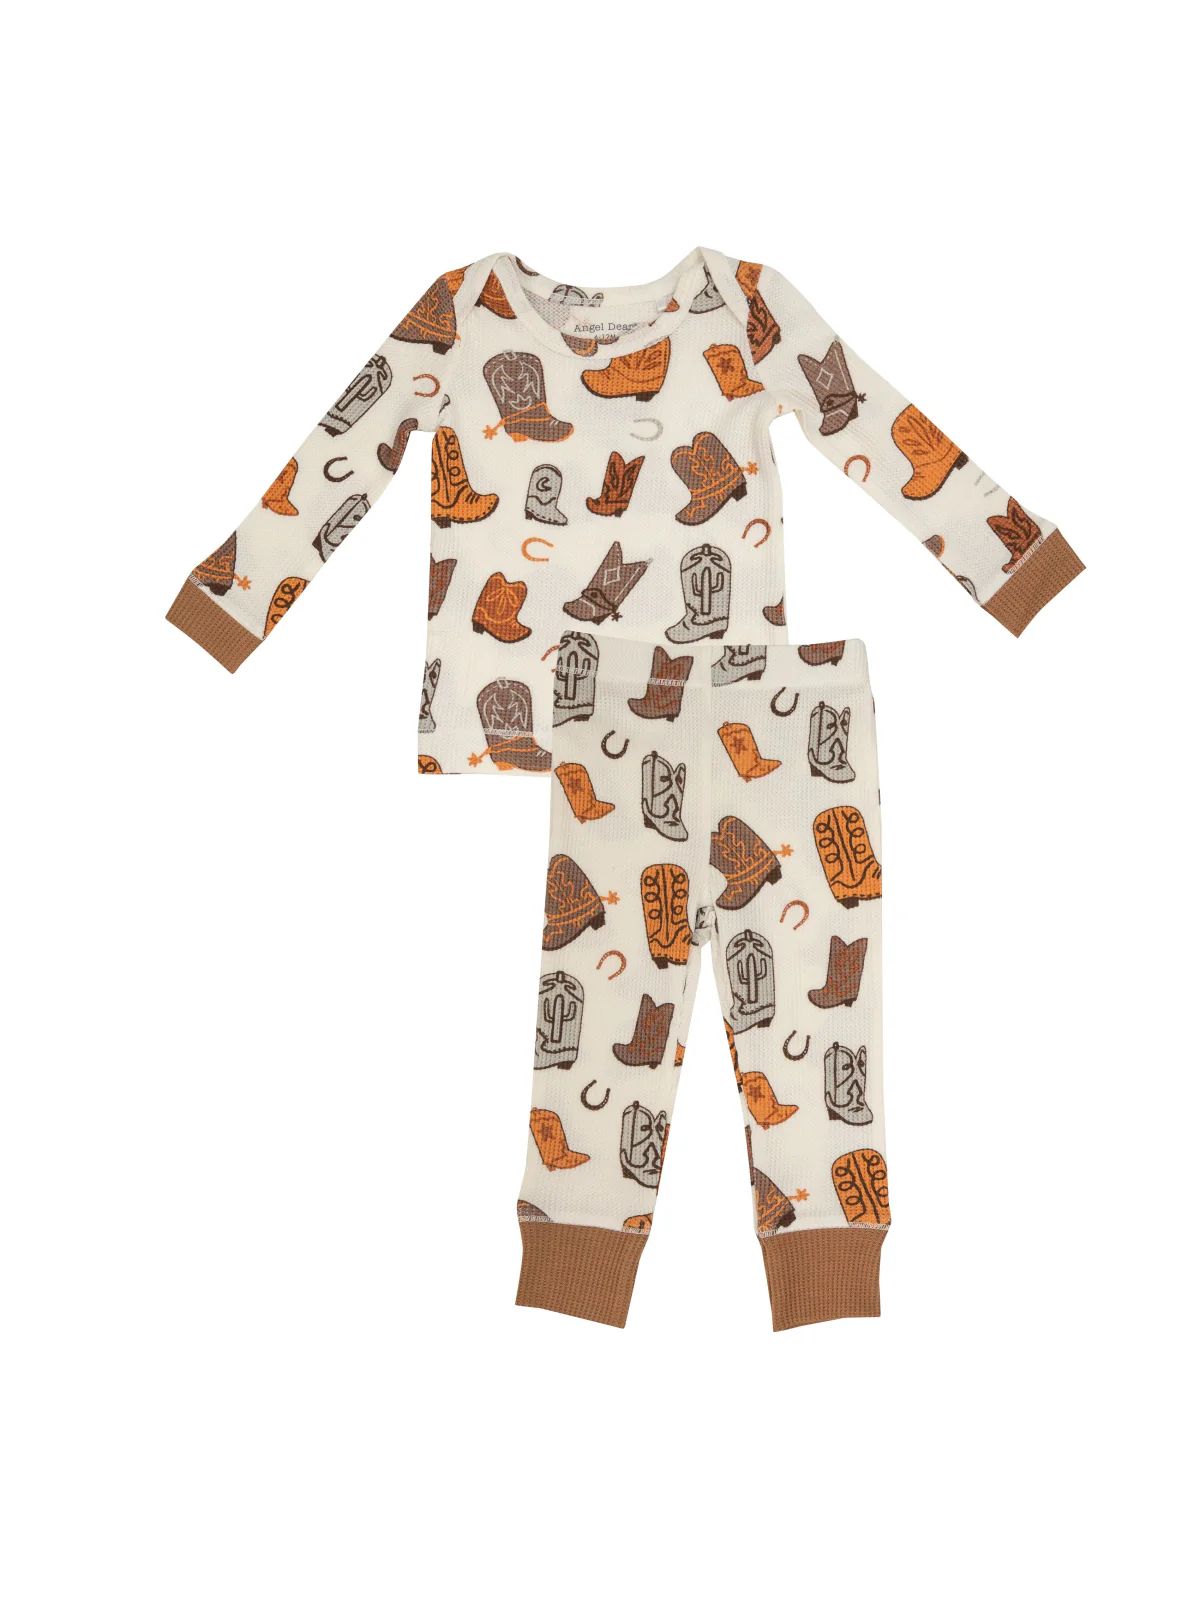 Thermal 2-Piece Lounge Wear Set, Brown Cowboy Boots | SpearmintLOVE